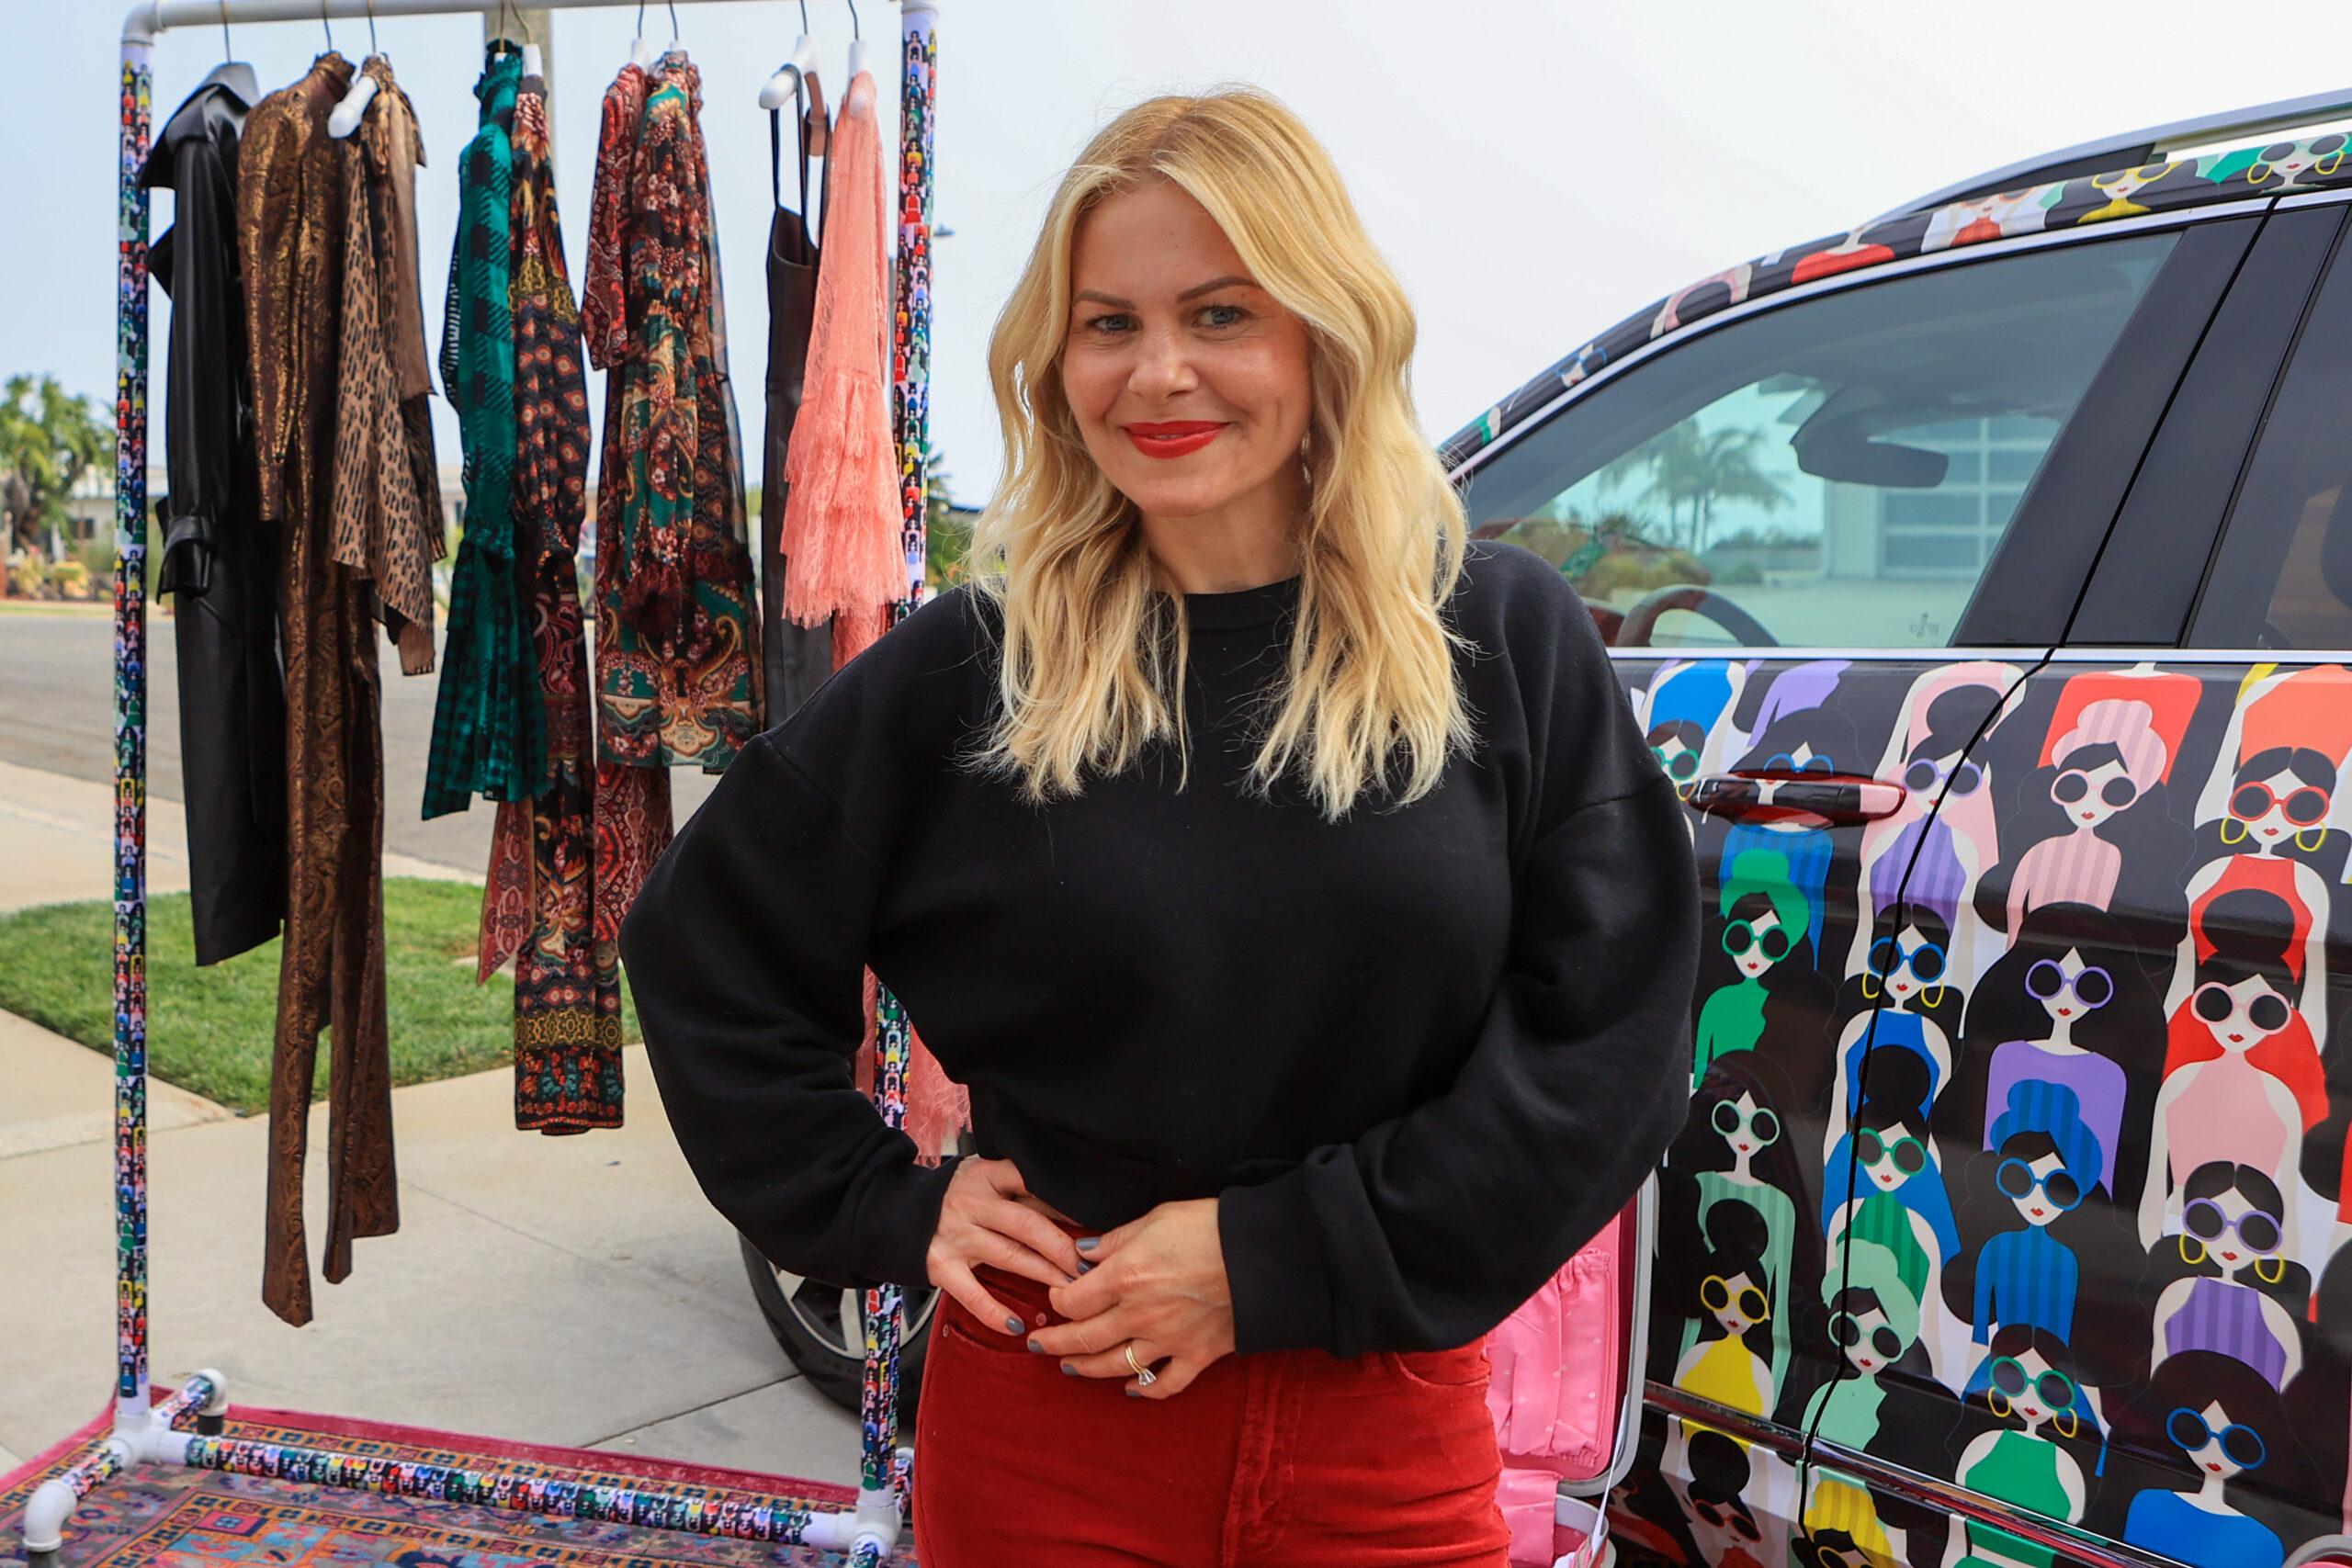 Candace Cameron Bure experiences the Alice Olivia by Stacey Bendet amp Volkswagen mobile gifting suite in Los Angeles